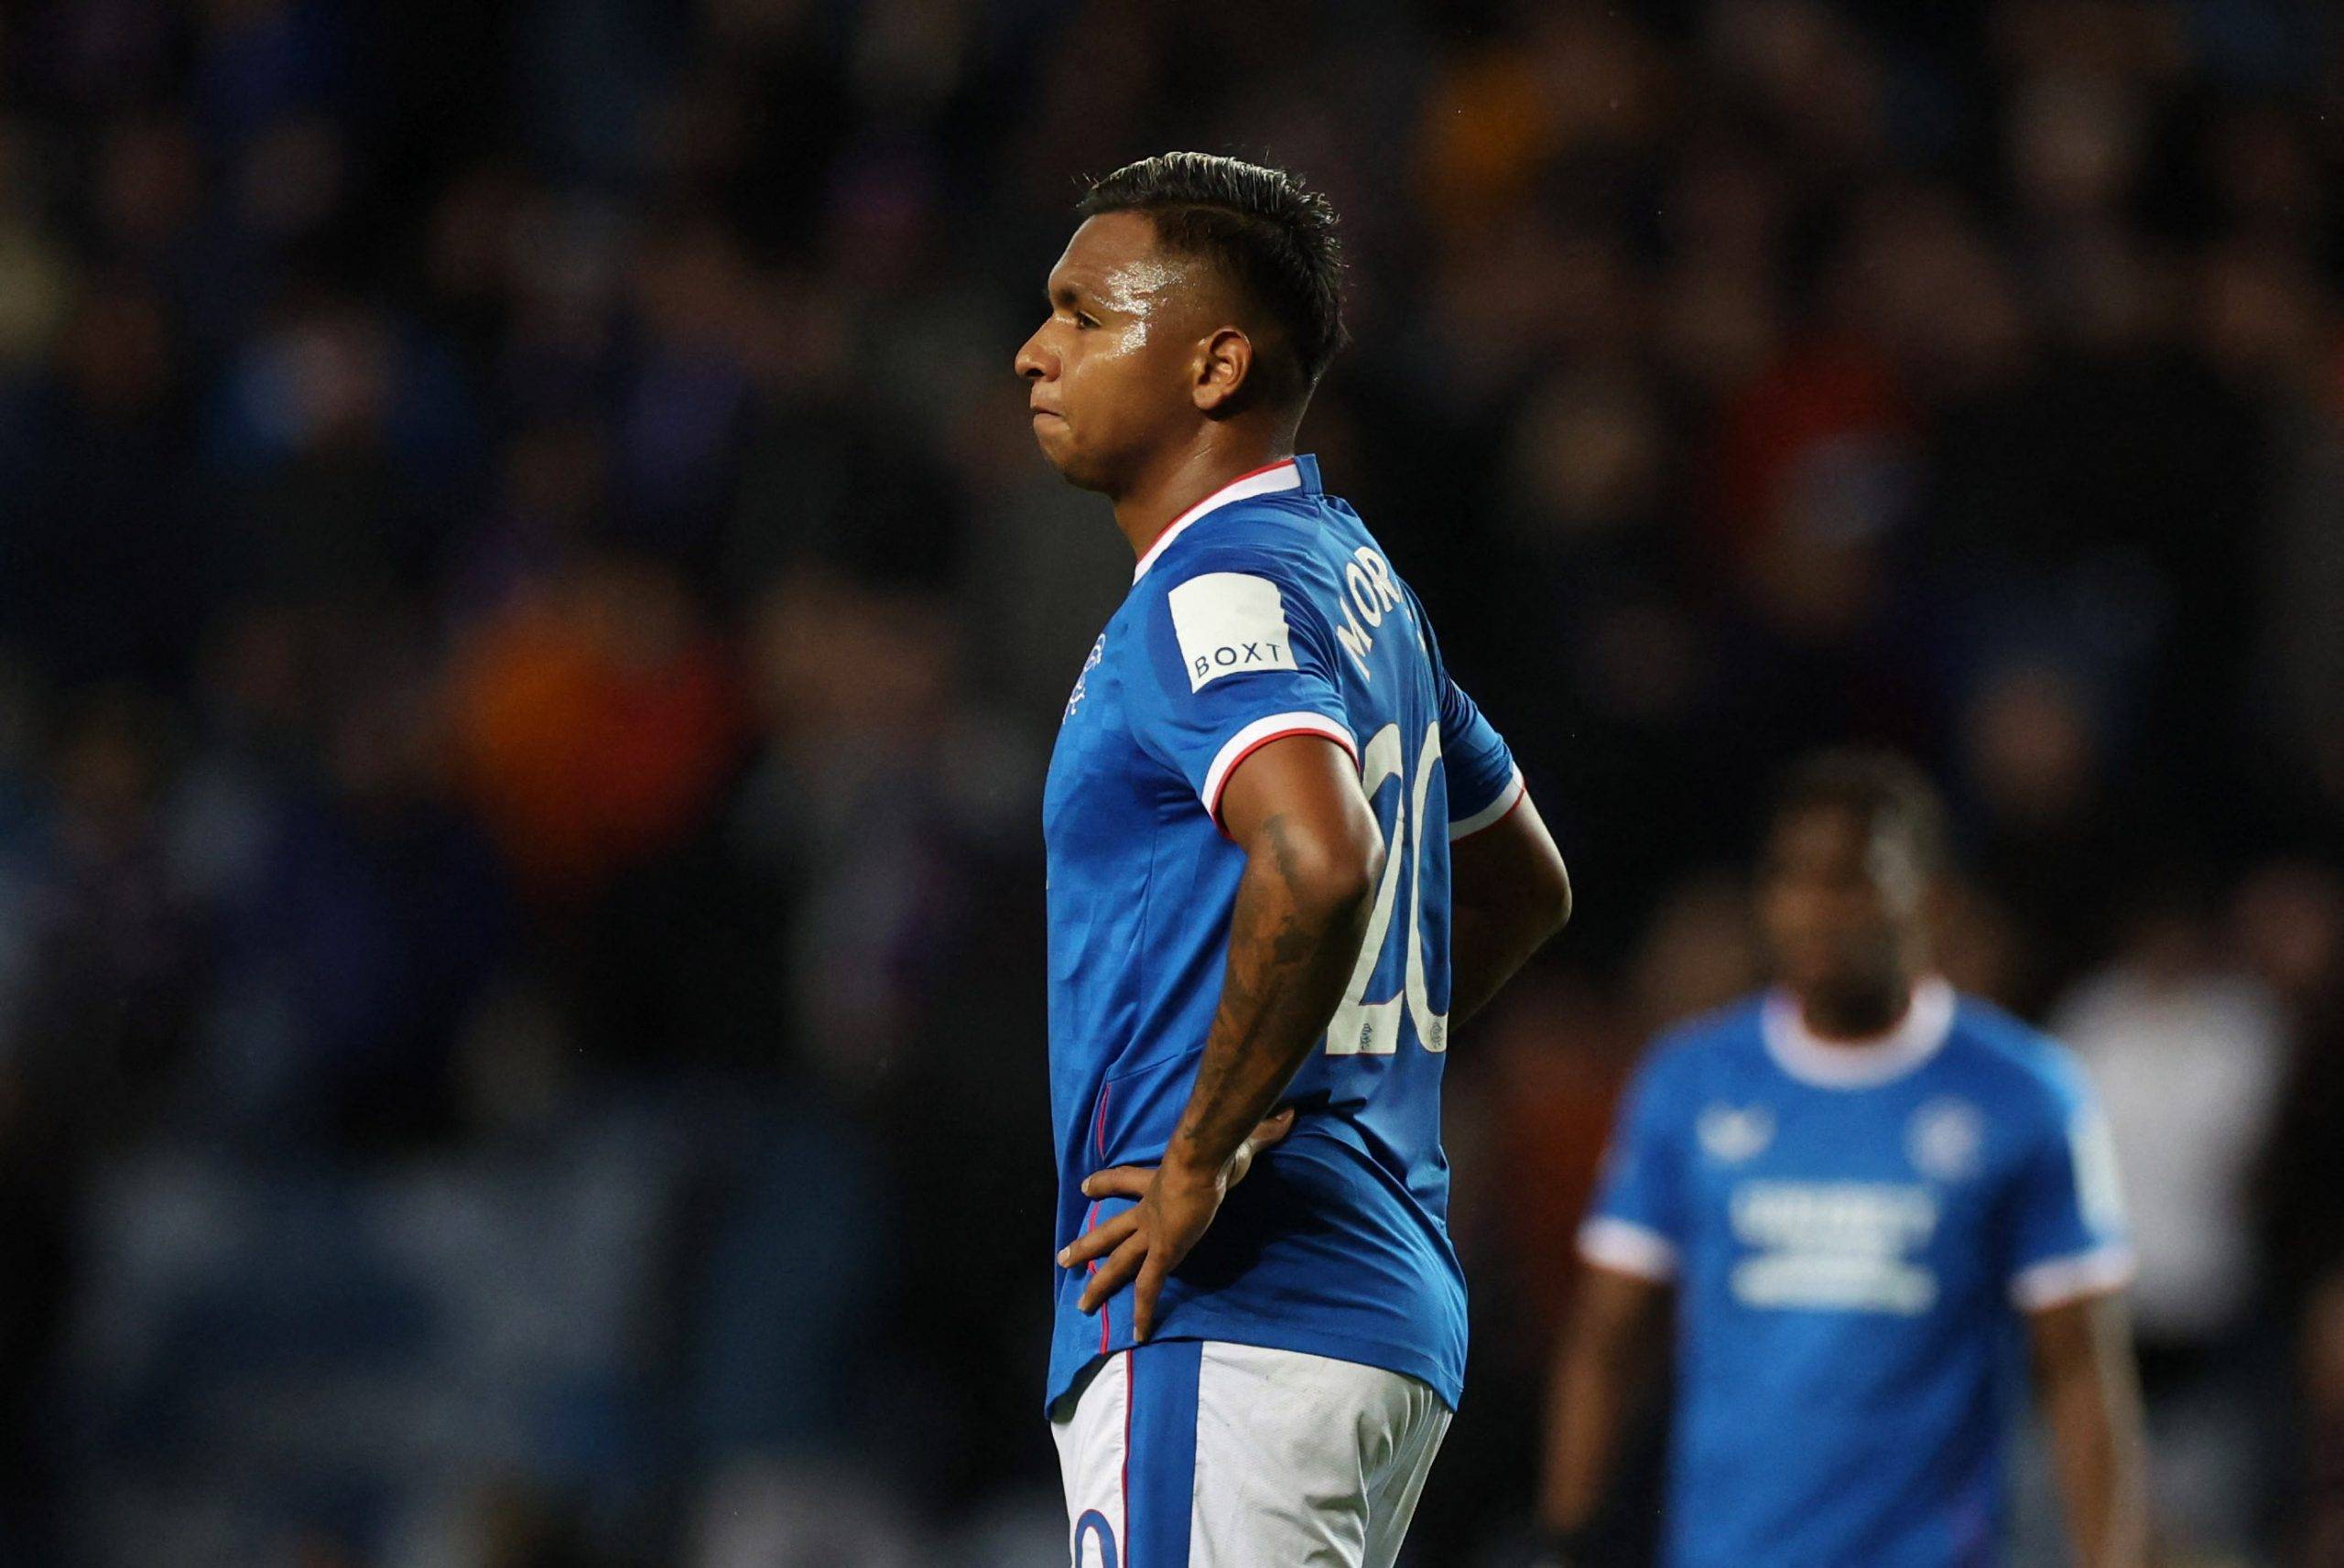 Rangers: Alfredo Morelos reportedly signs pre-contract agreement - Rangers News